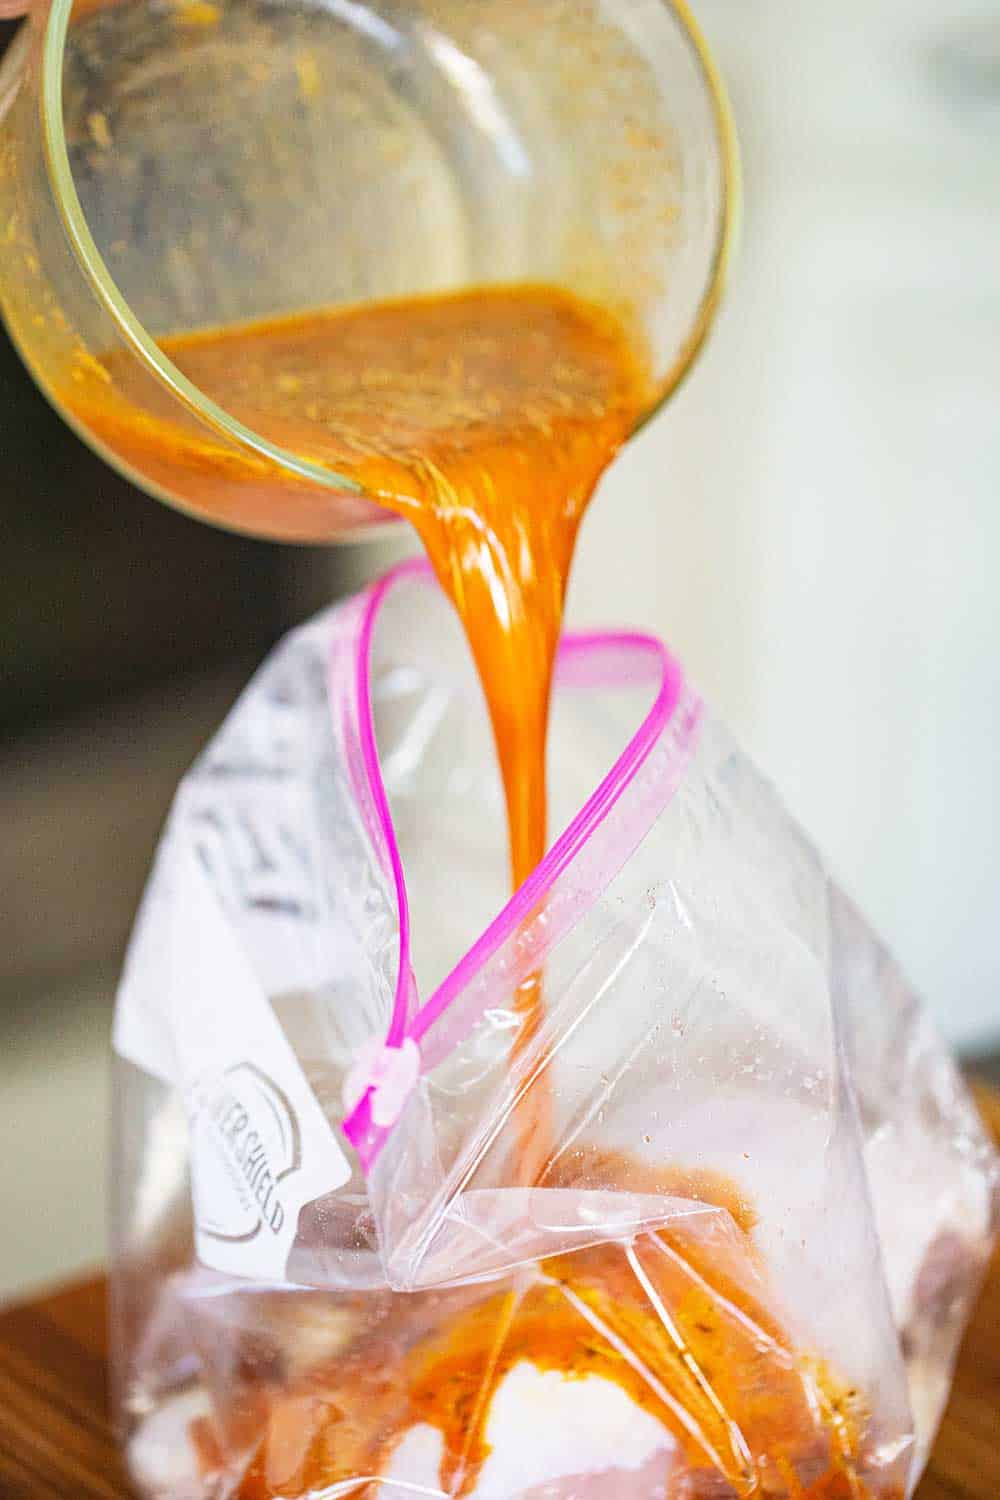 An orange colored marinade being poured from a measuring cup into a plastic freezer baggie with chicken pieces in it.